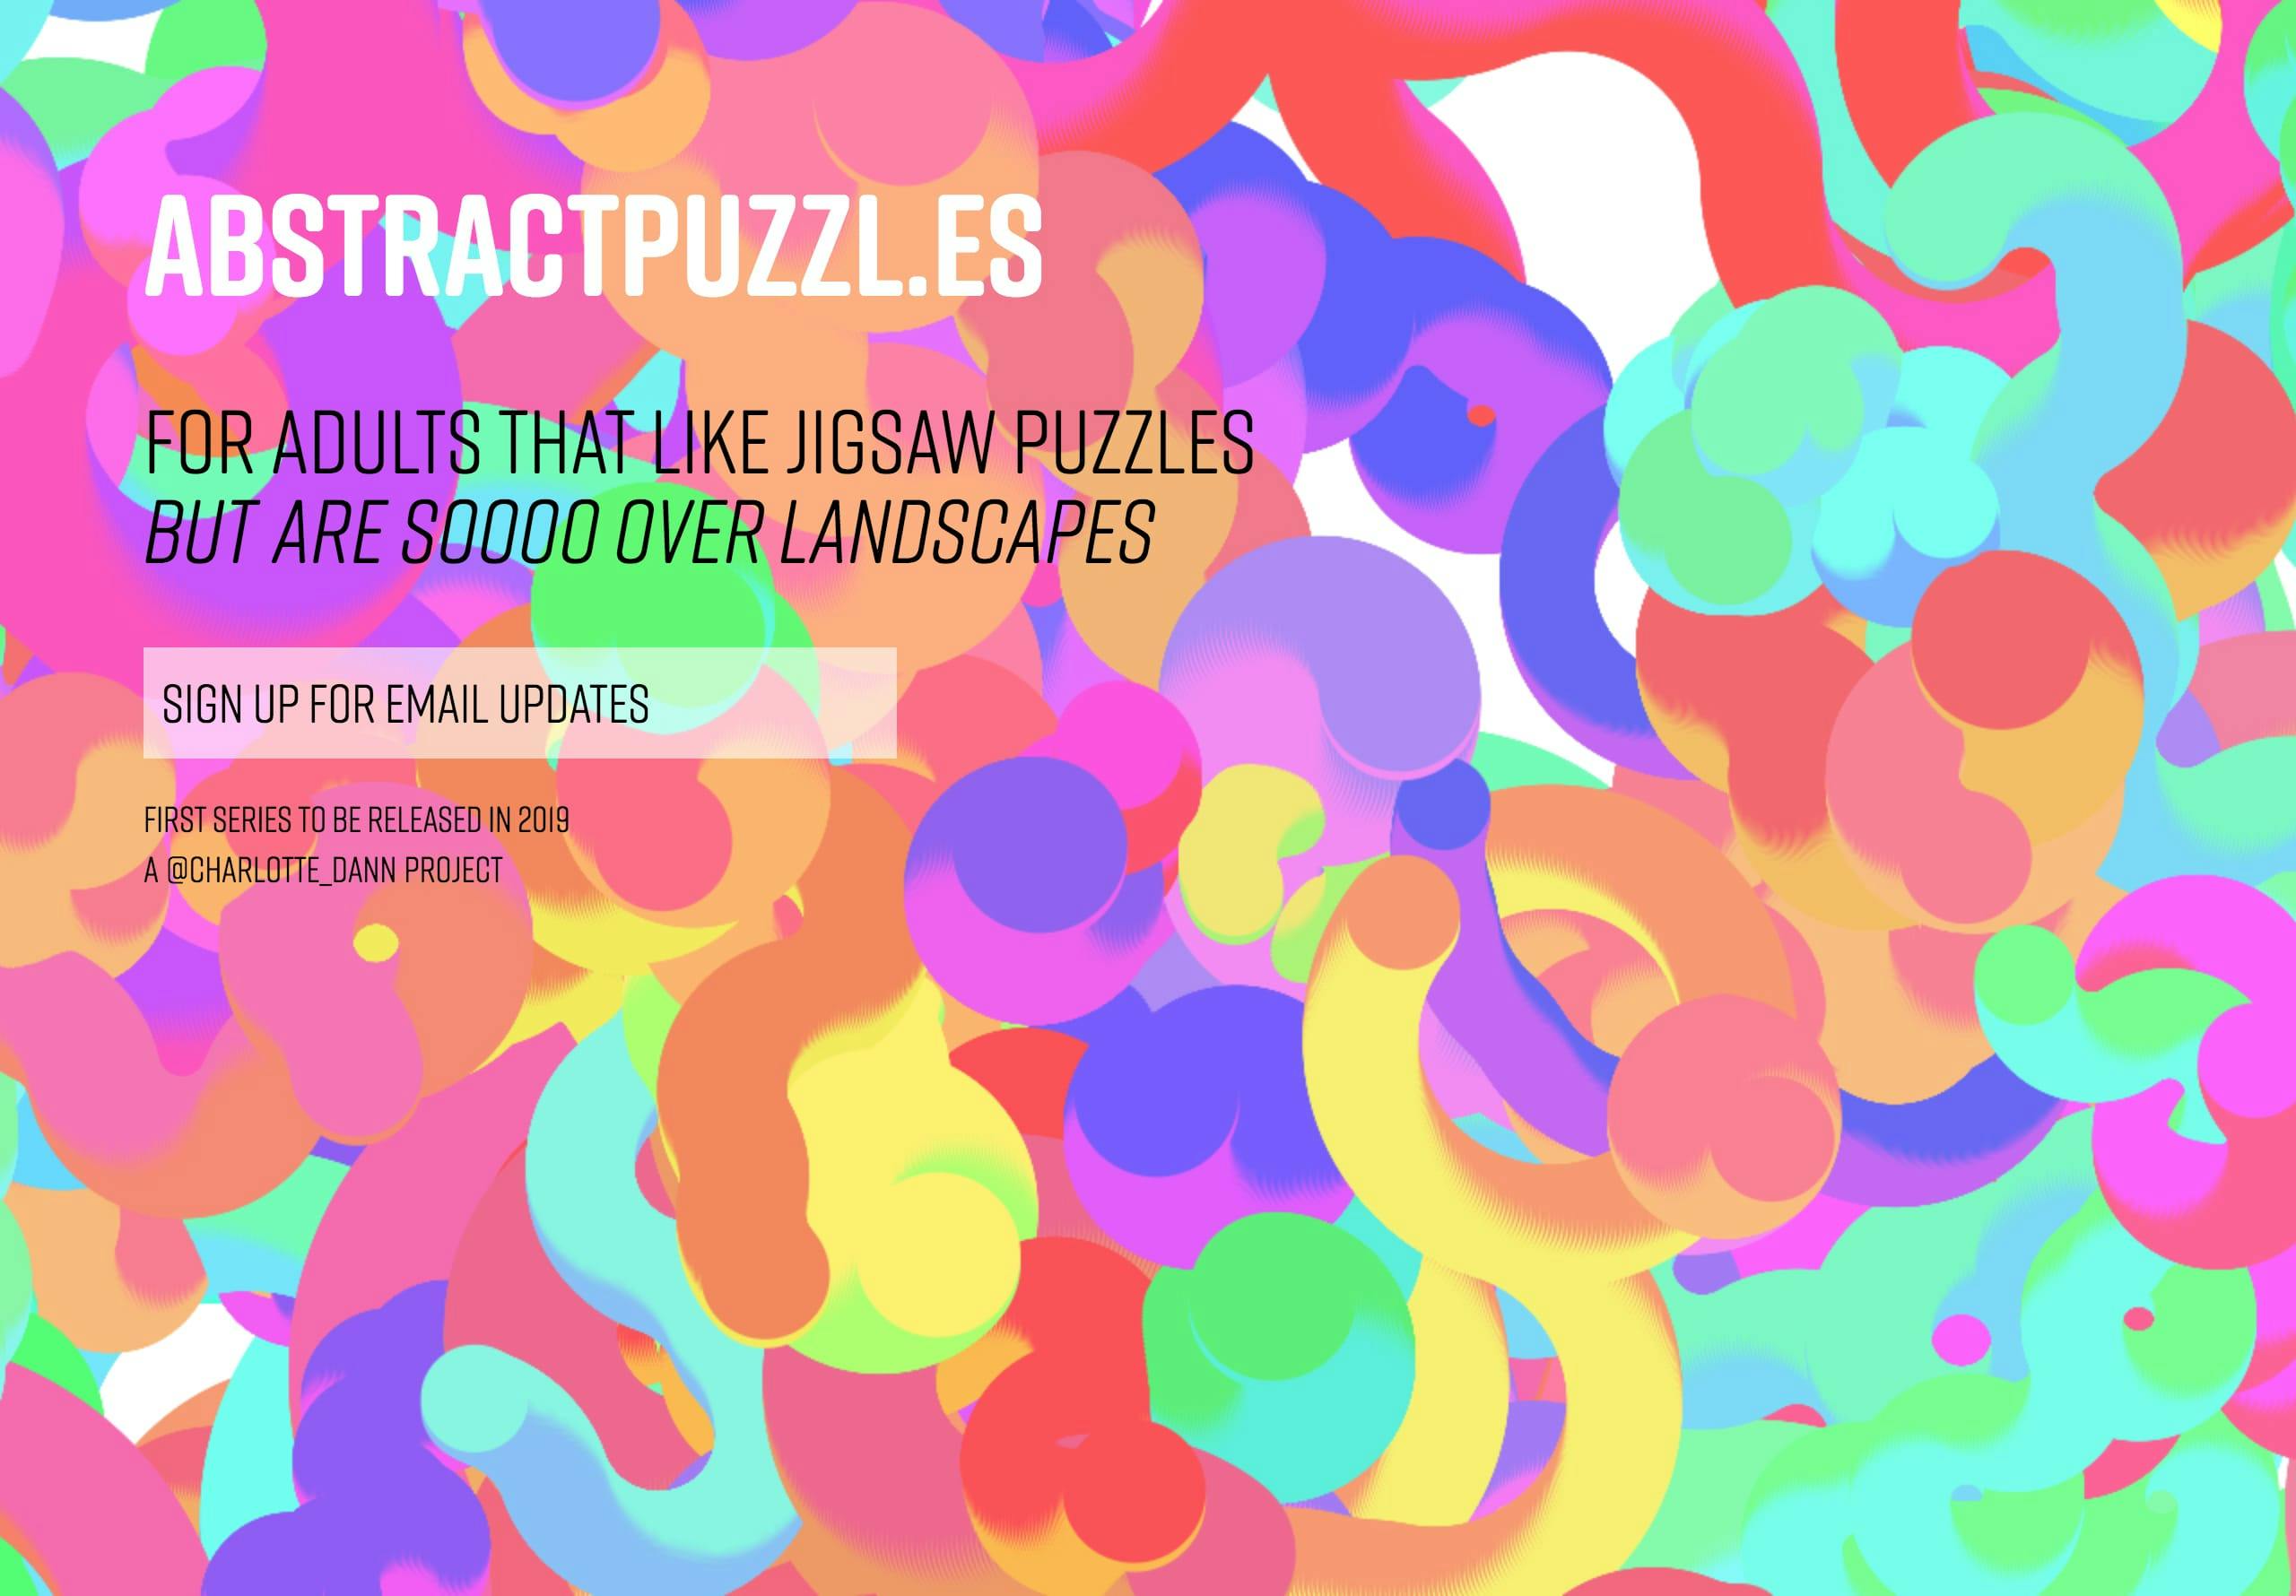 Abstract Puzzles Website Screenshot